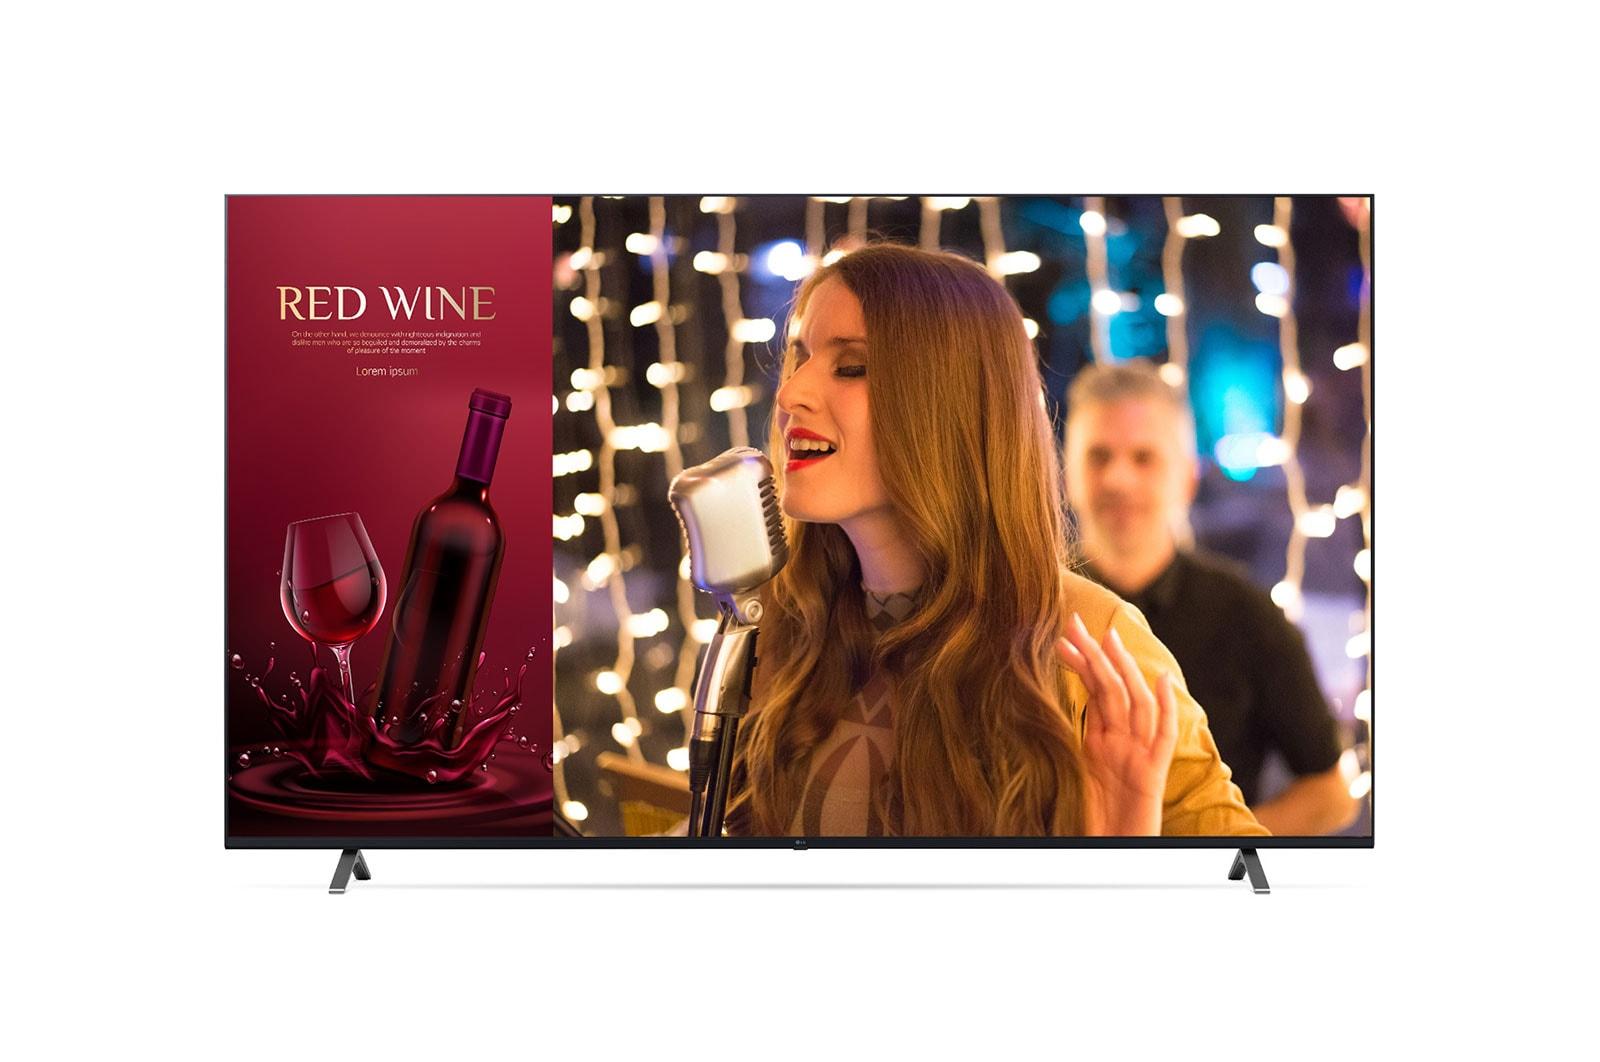 43" UR640S Series UHD Signage TV with Slim Depth, LG SuperSign CMS, and Embedded Content & Group Management